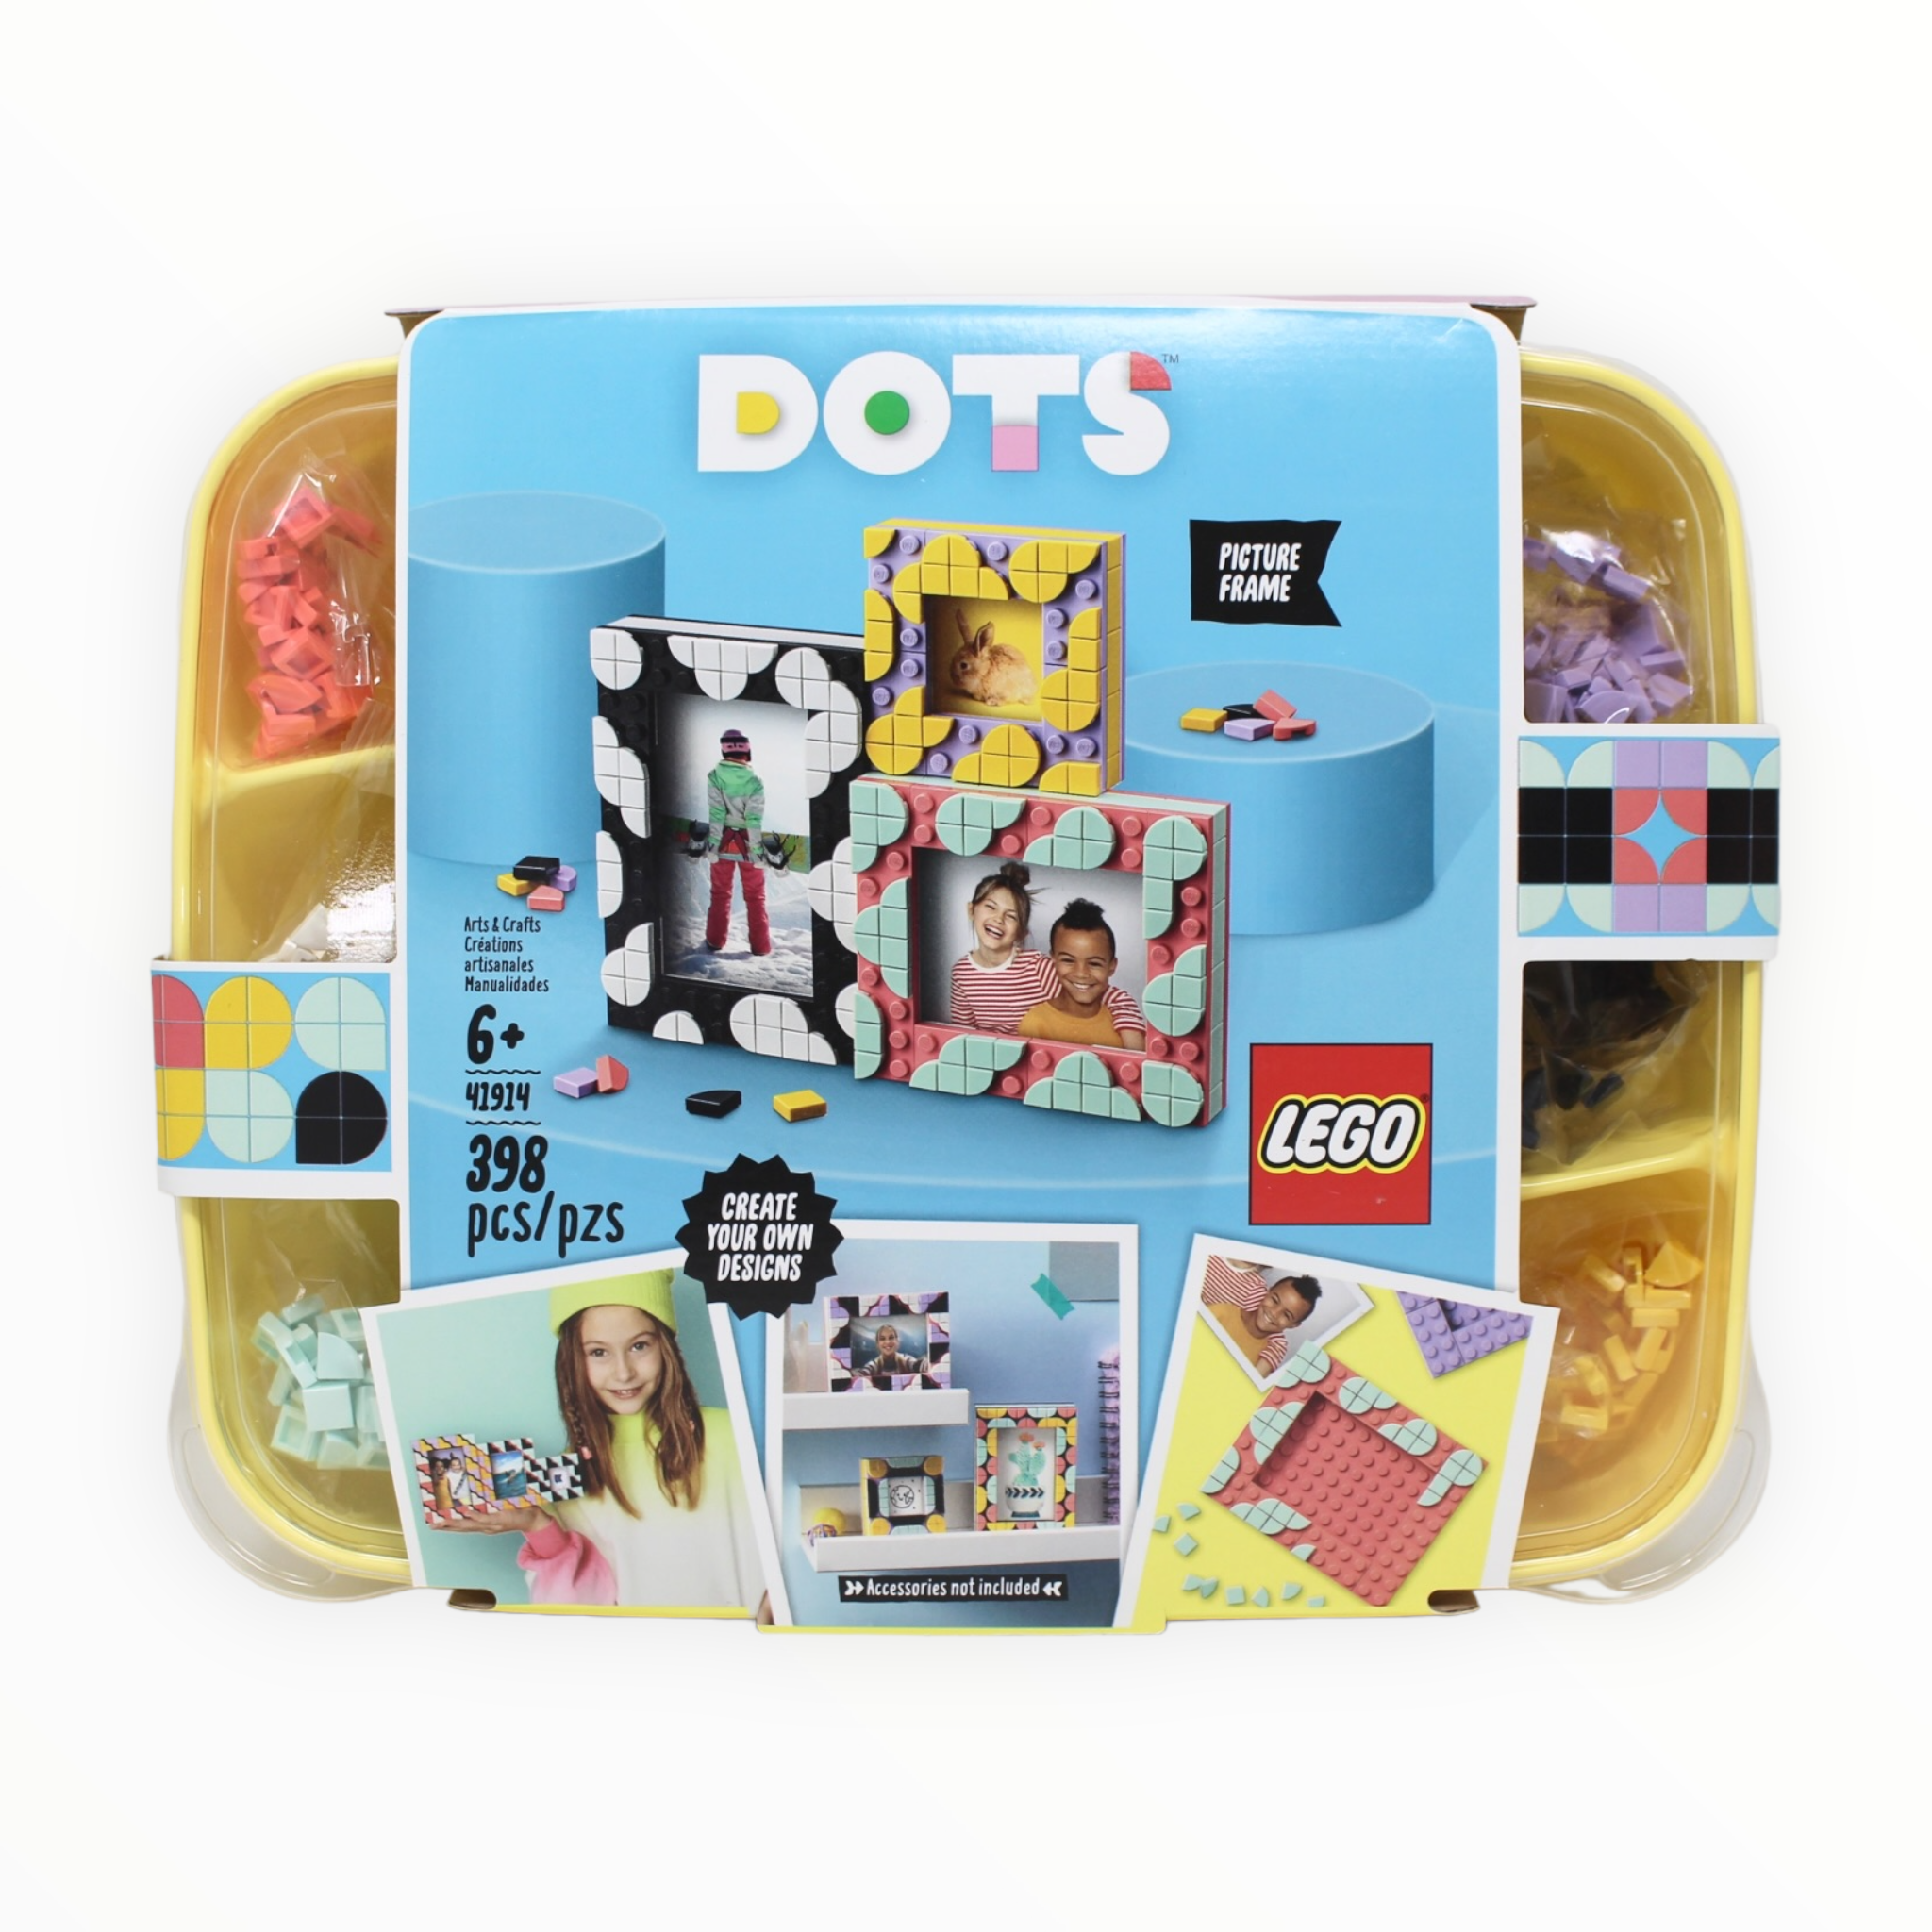 Retired Set 41914 DOTS Picture Frame